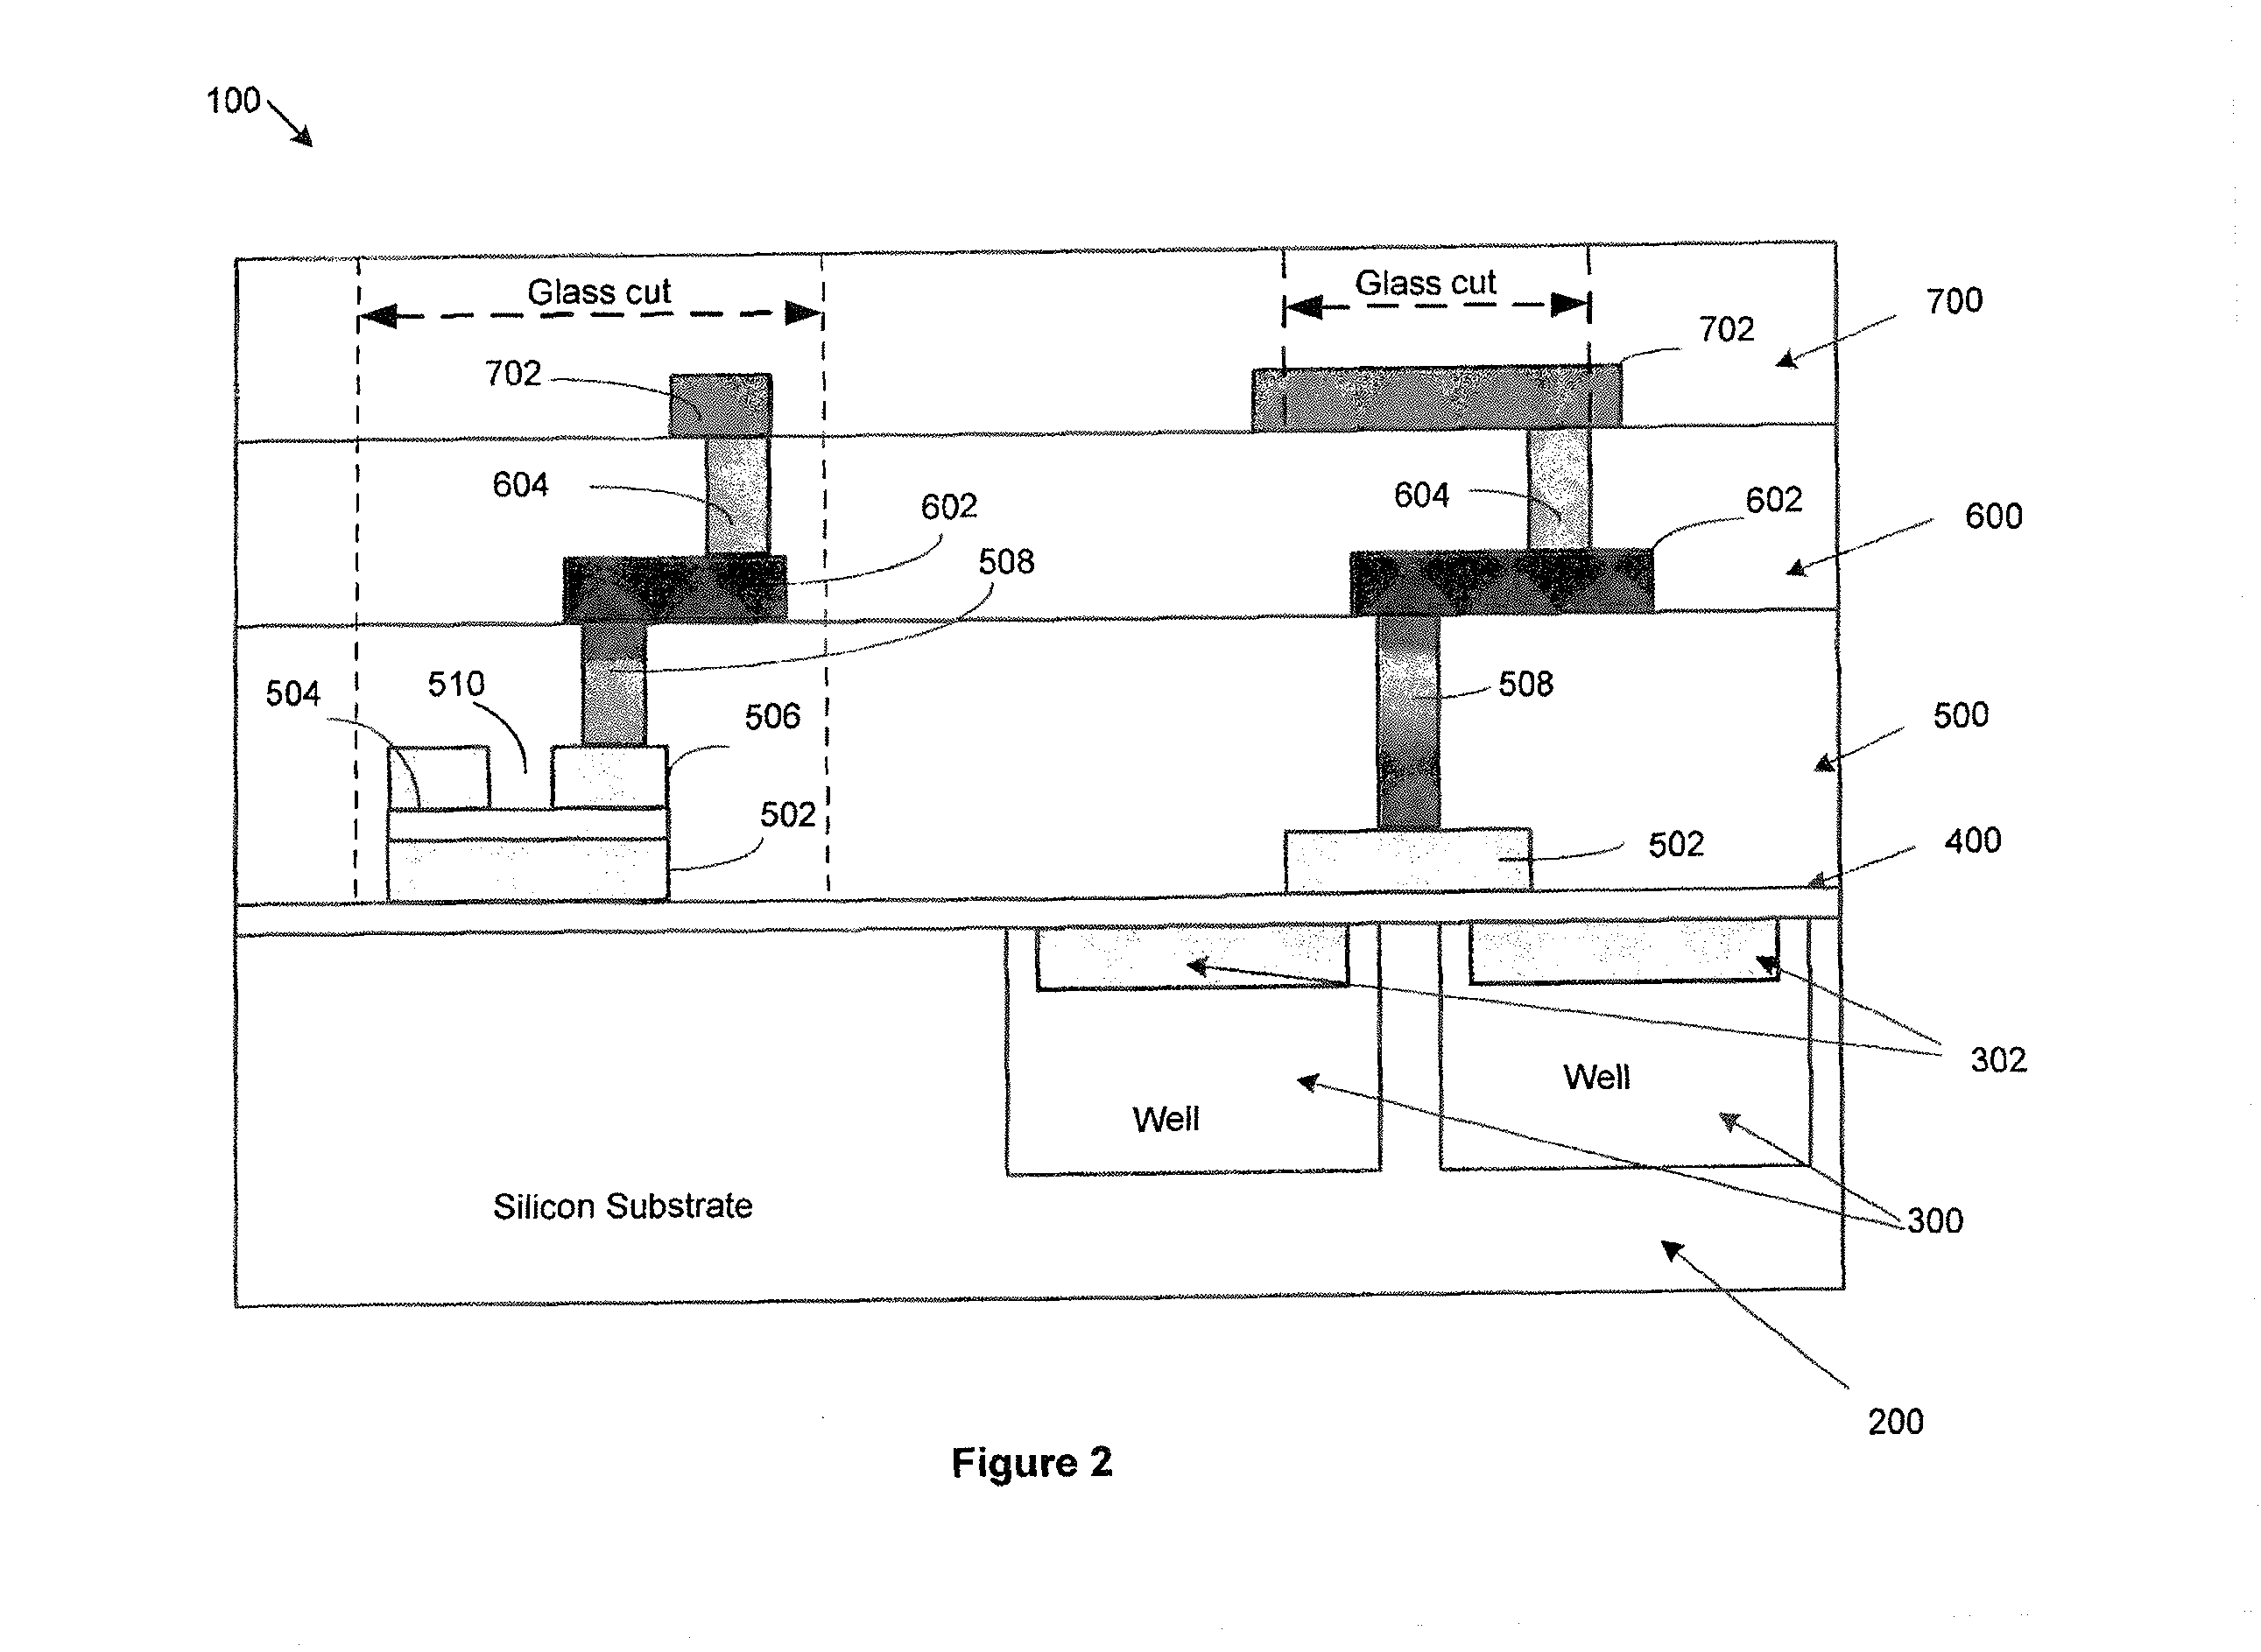 CMOS integrated micromechanical resonators and methods for fabricating the same